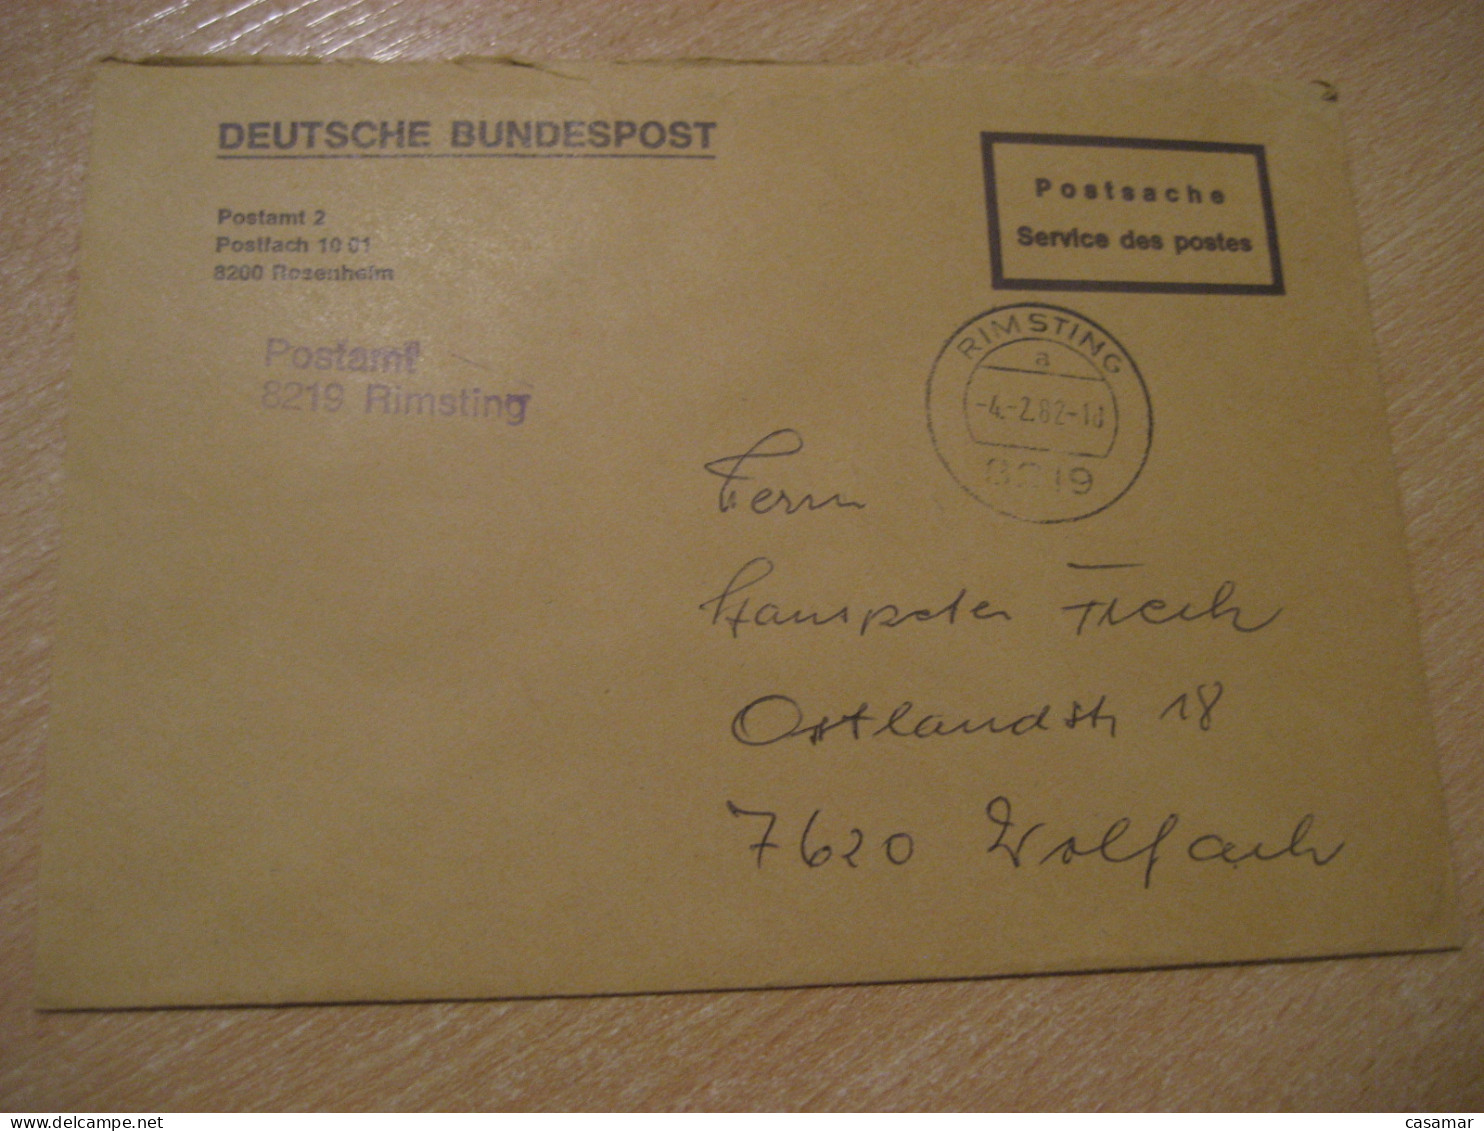 RIMSTING 1982 To Wolfach Postage Paid Cancel Cover GERMANY - Covers & Documents